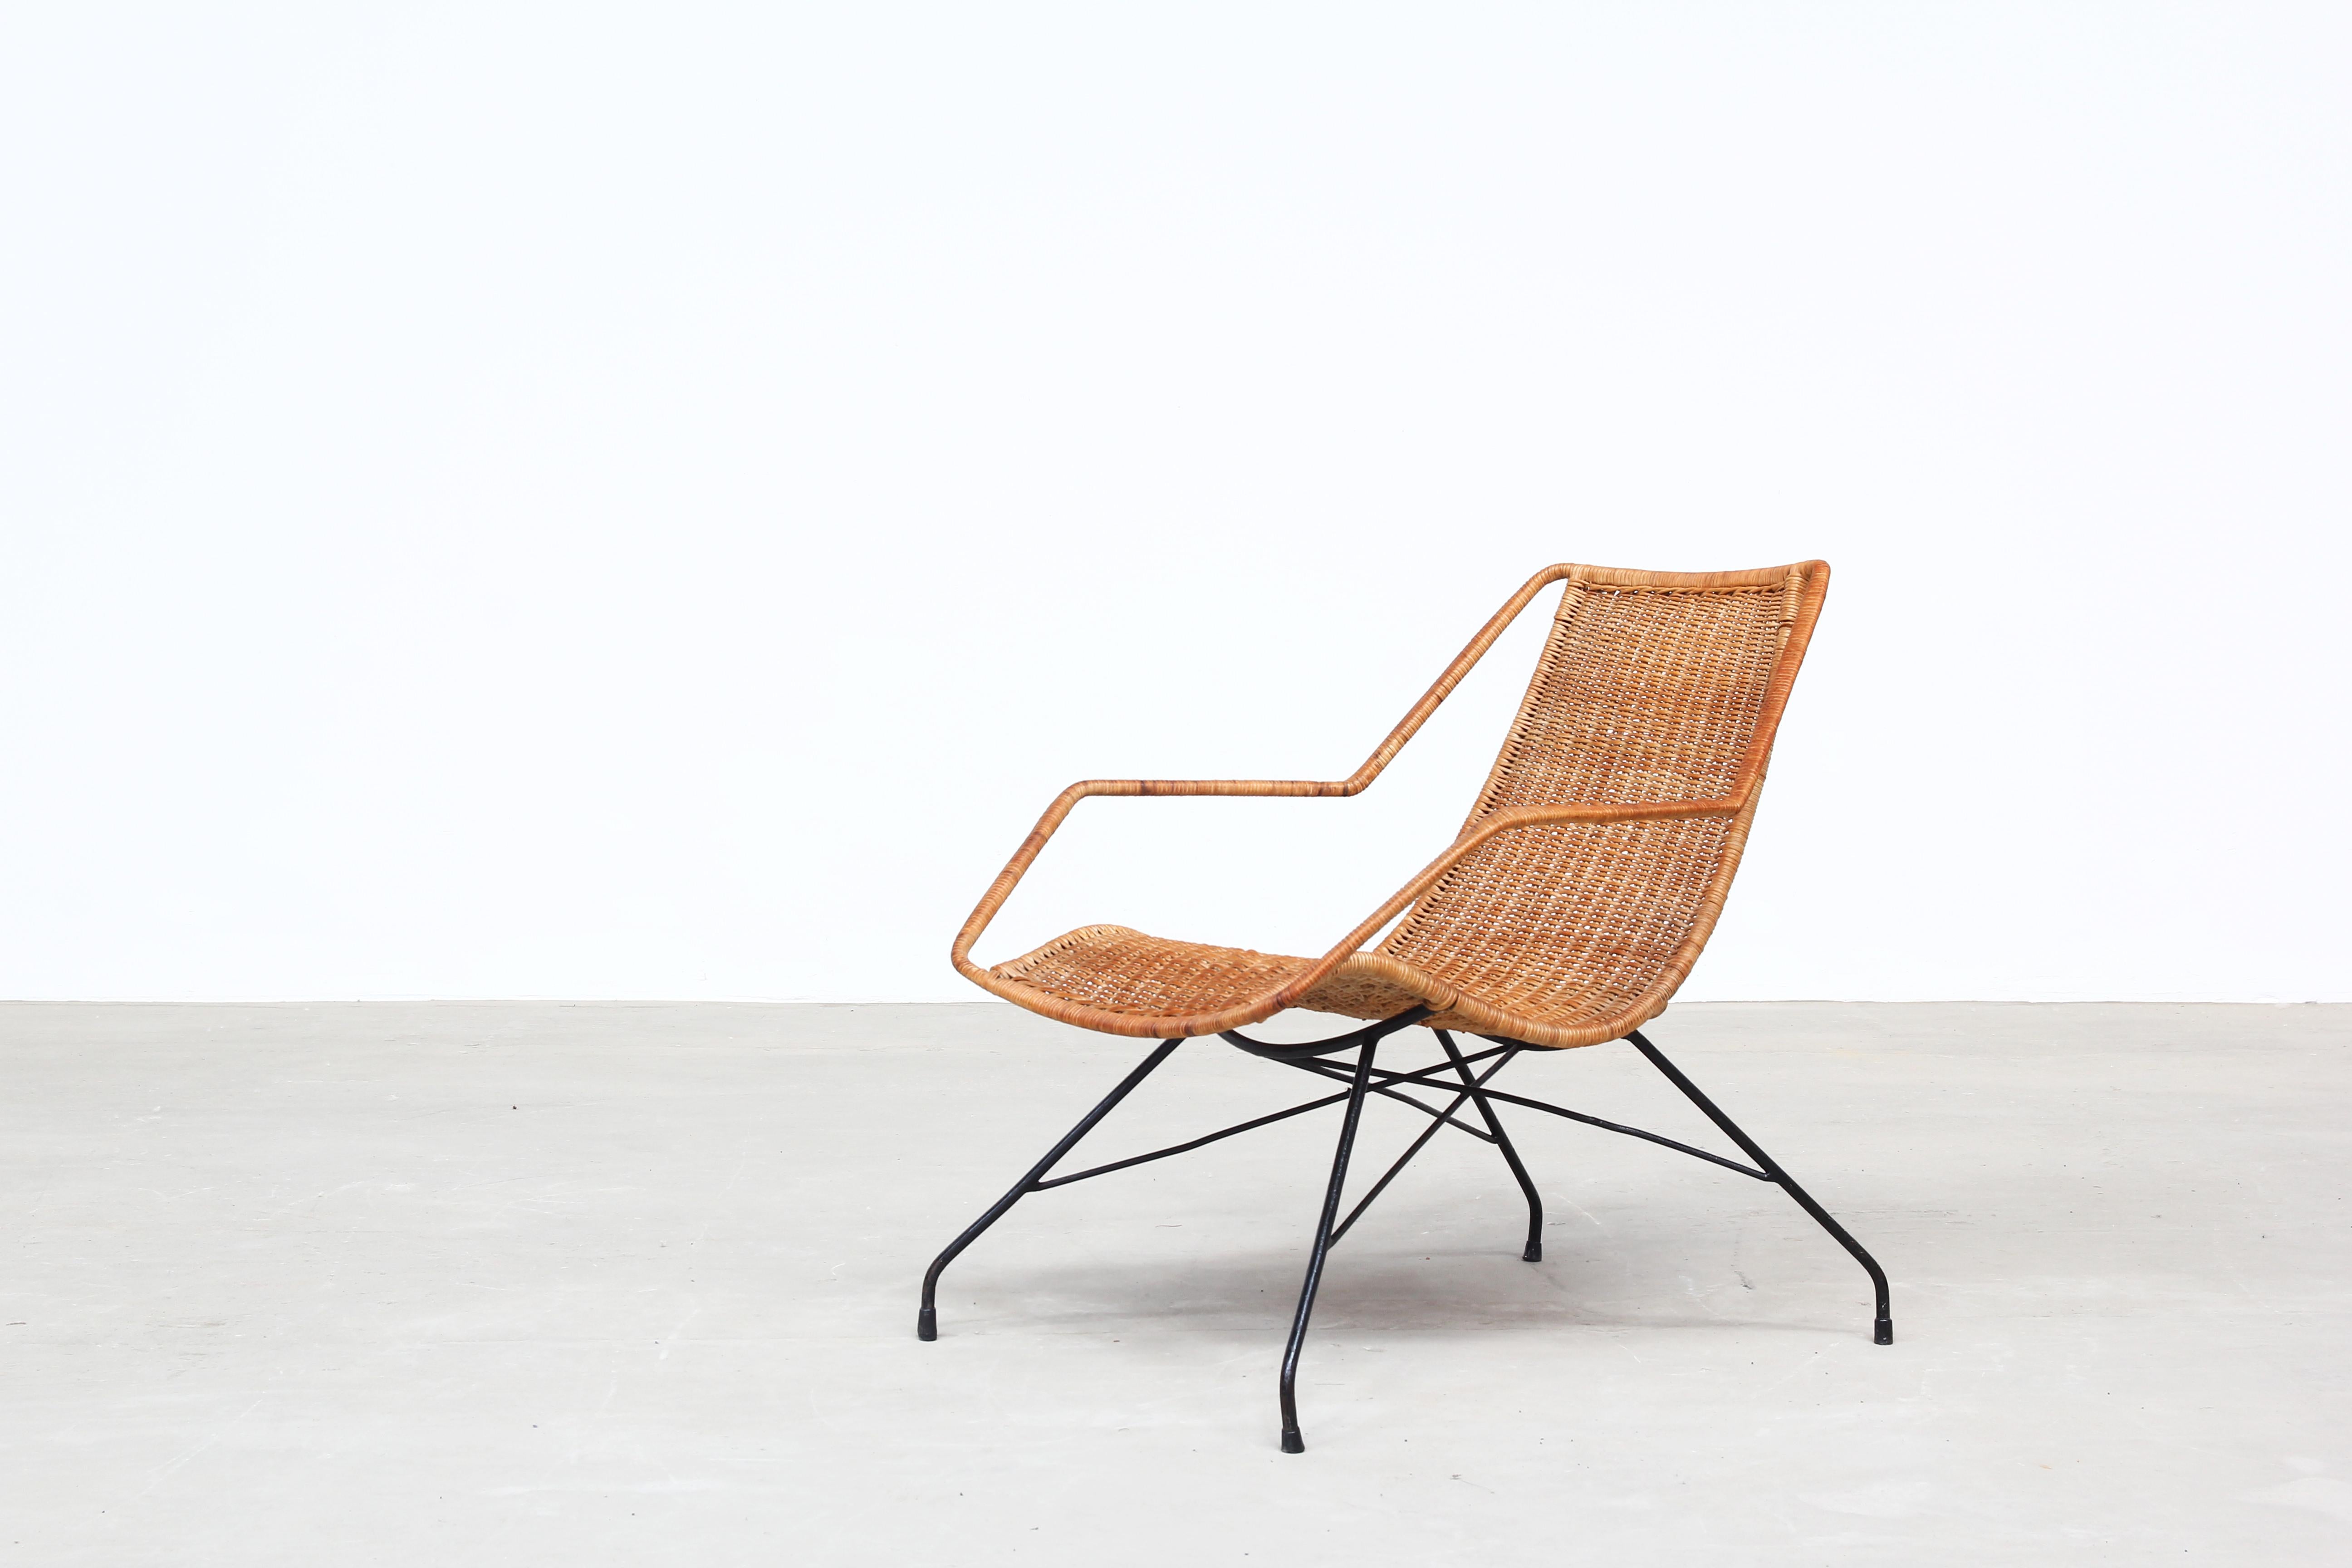 Lounge chair with ottoman by Carlo Hauner & Martin Eisler manufactured in Brasil.
The lounge chairs comes with a light metal frame and a rattan mesh in a very good condition. Ready for usage.

